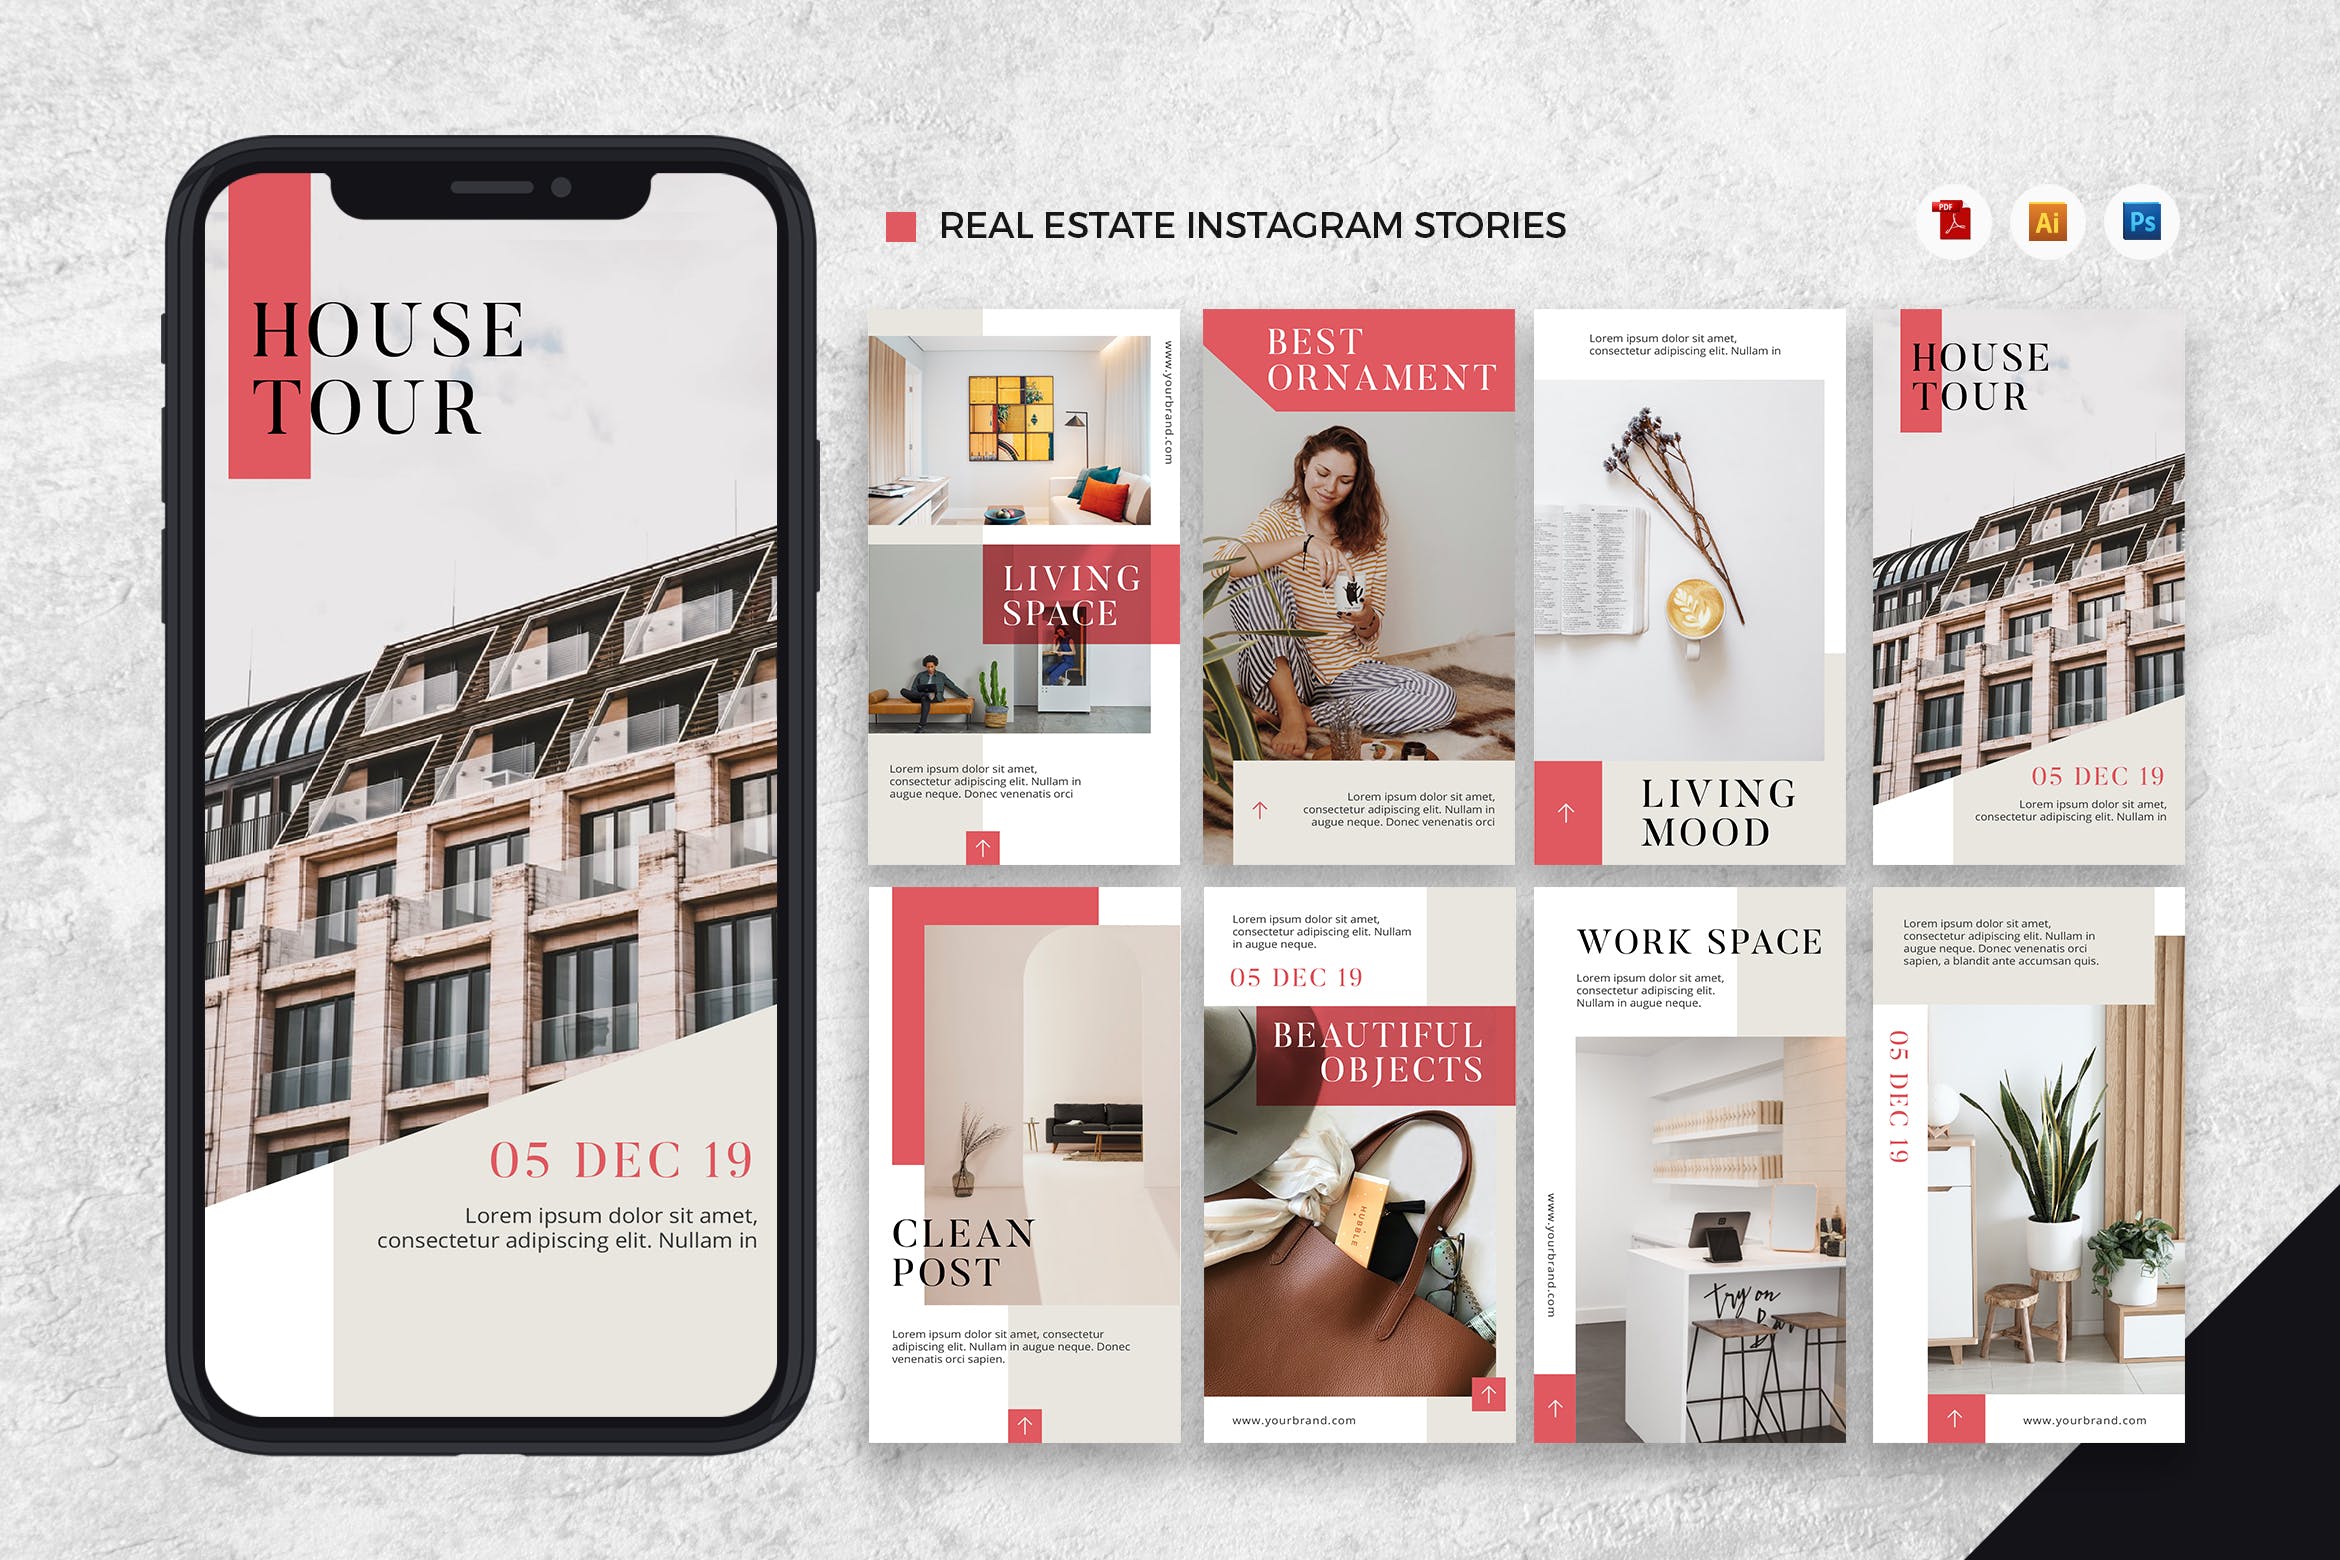 Instagrams设计房地产品牌故事推广设计模板素材库精选[AI&PSD] Real Estate Instagram Stories AI and PSD Template插图